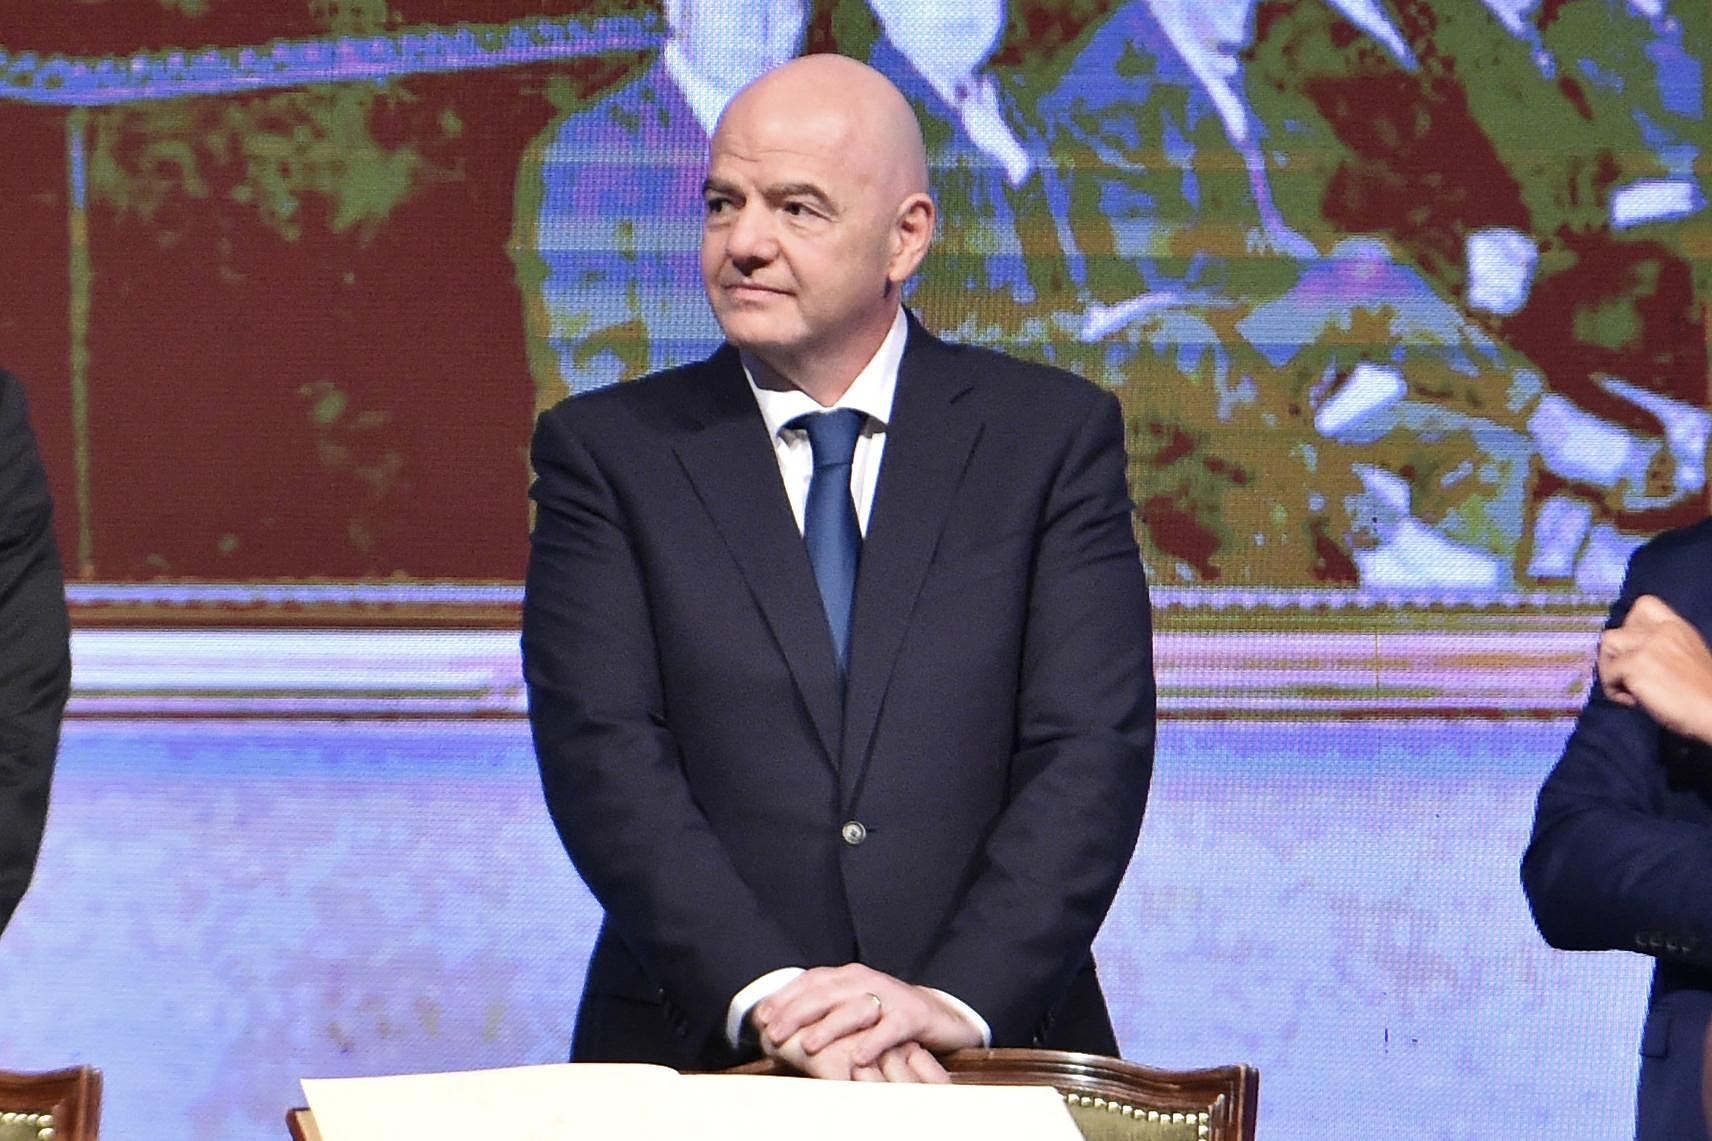 “There are problems of racism in football,” admits Infantino, FIFA president